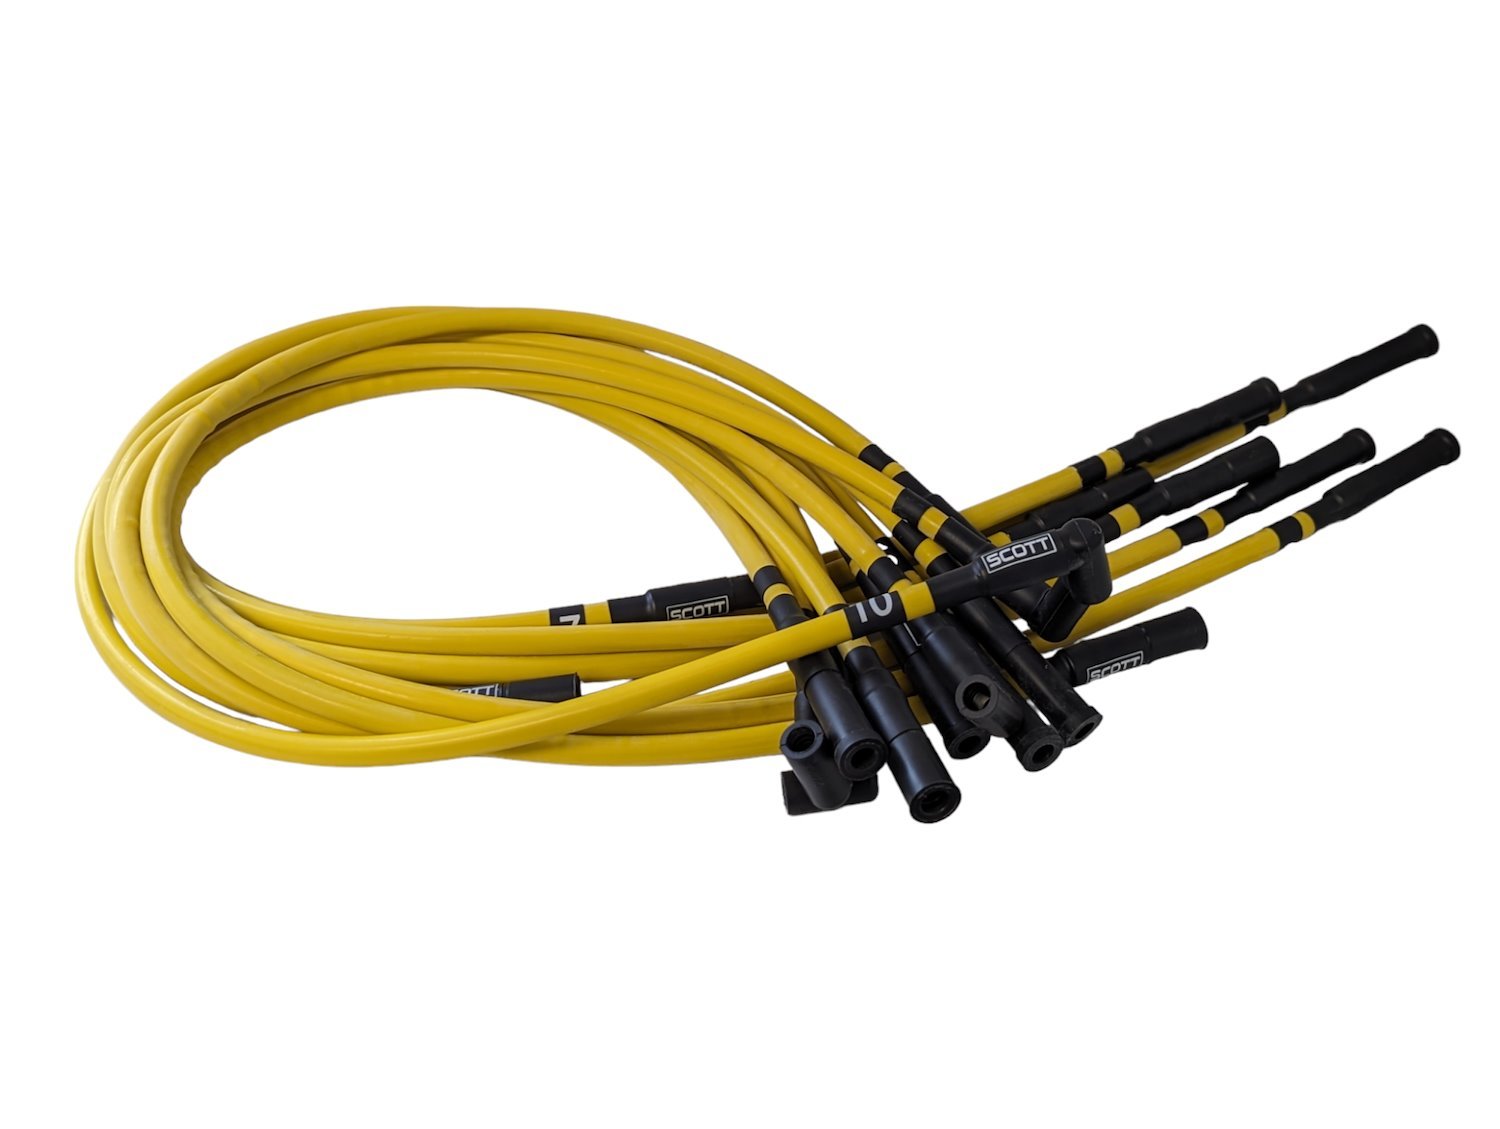 SPW300-CH-690-II-7 Super Mag Fiberglass-Oversleeved Spark Plug Wire Set for Dodge Viper Gen2 [Yellow]